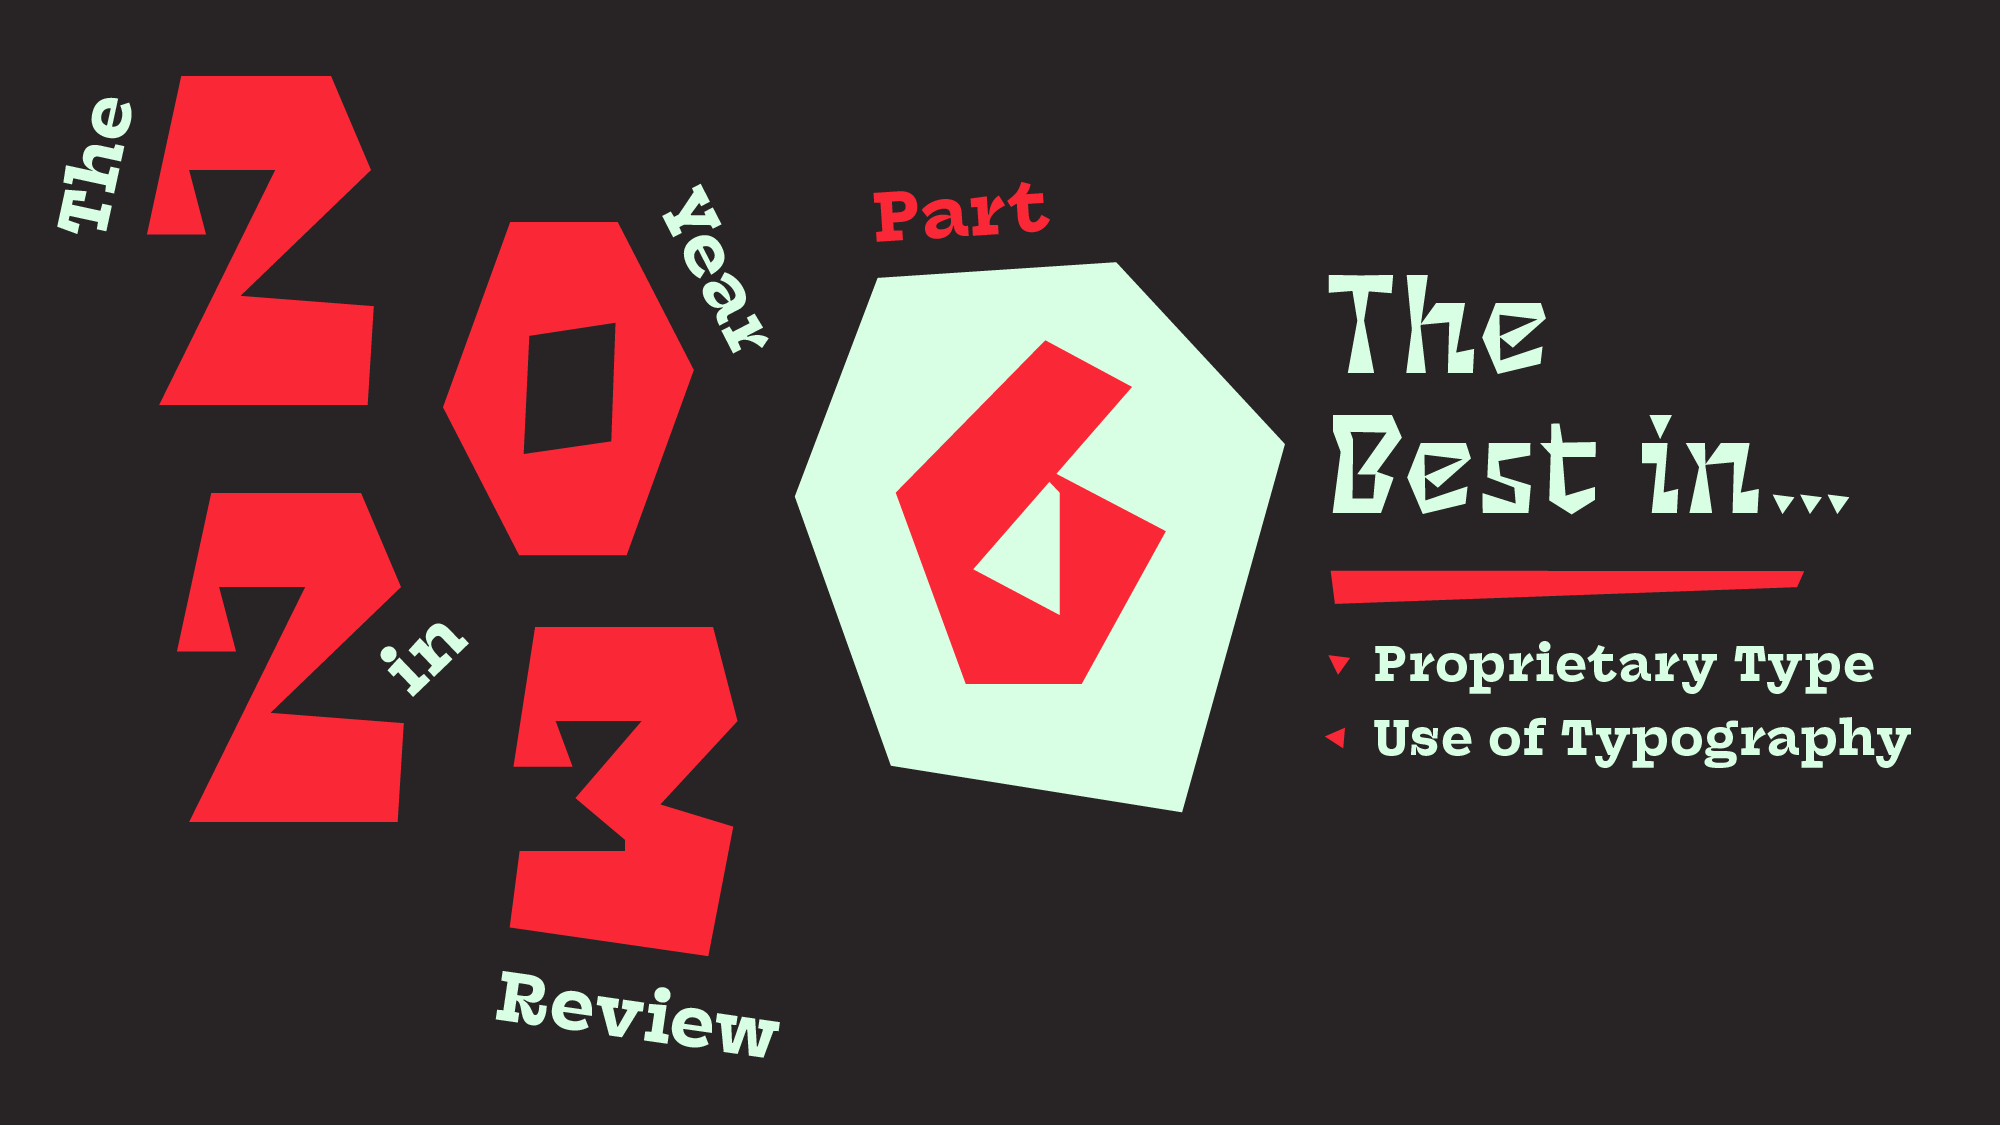 The Year in Review, Part 6: The Best in Proprietary Type and Use of Typography